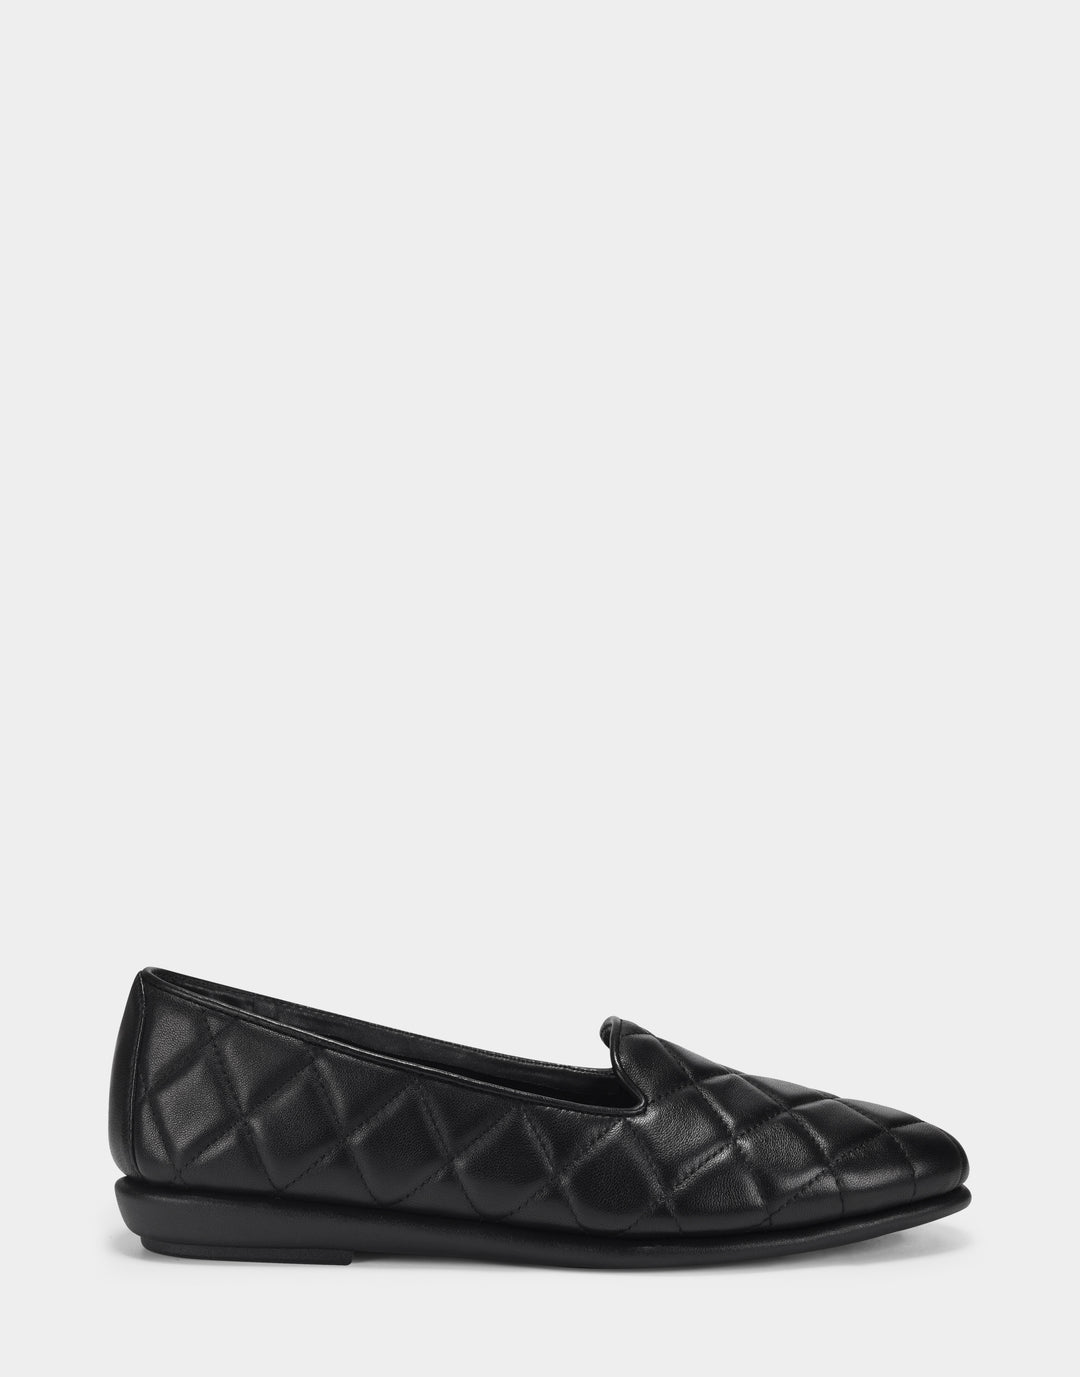 Betunia - comfortable  women's loafers in black